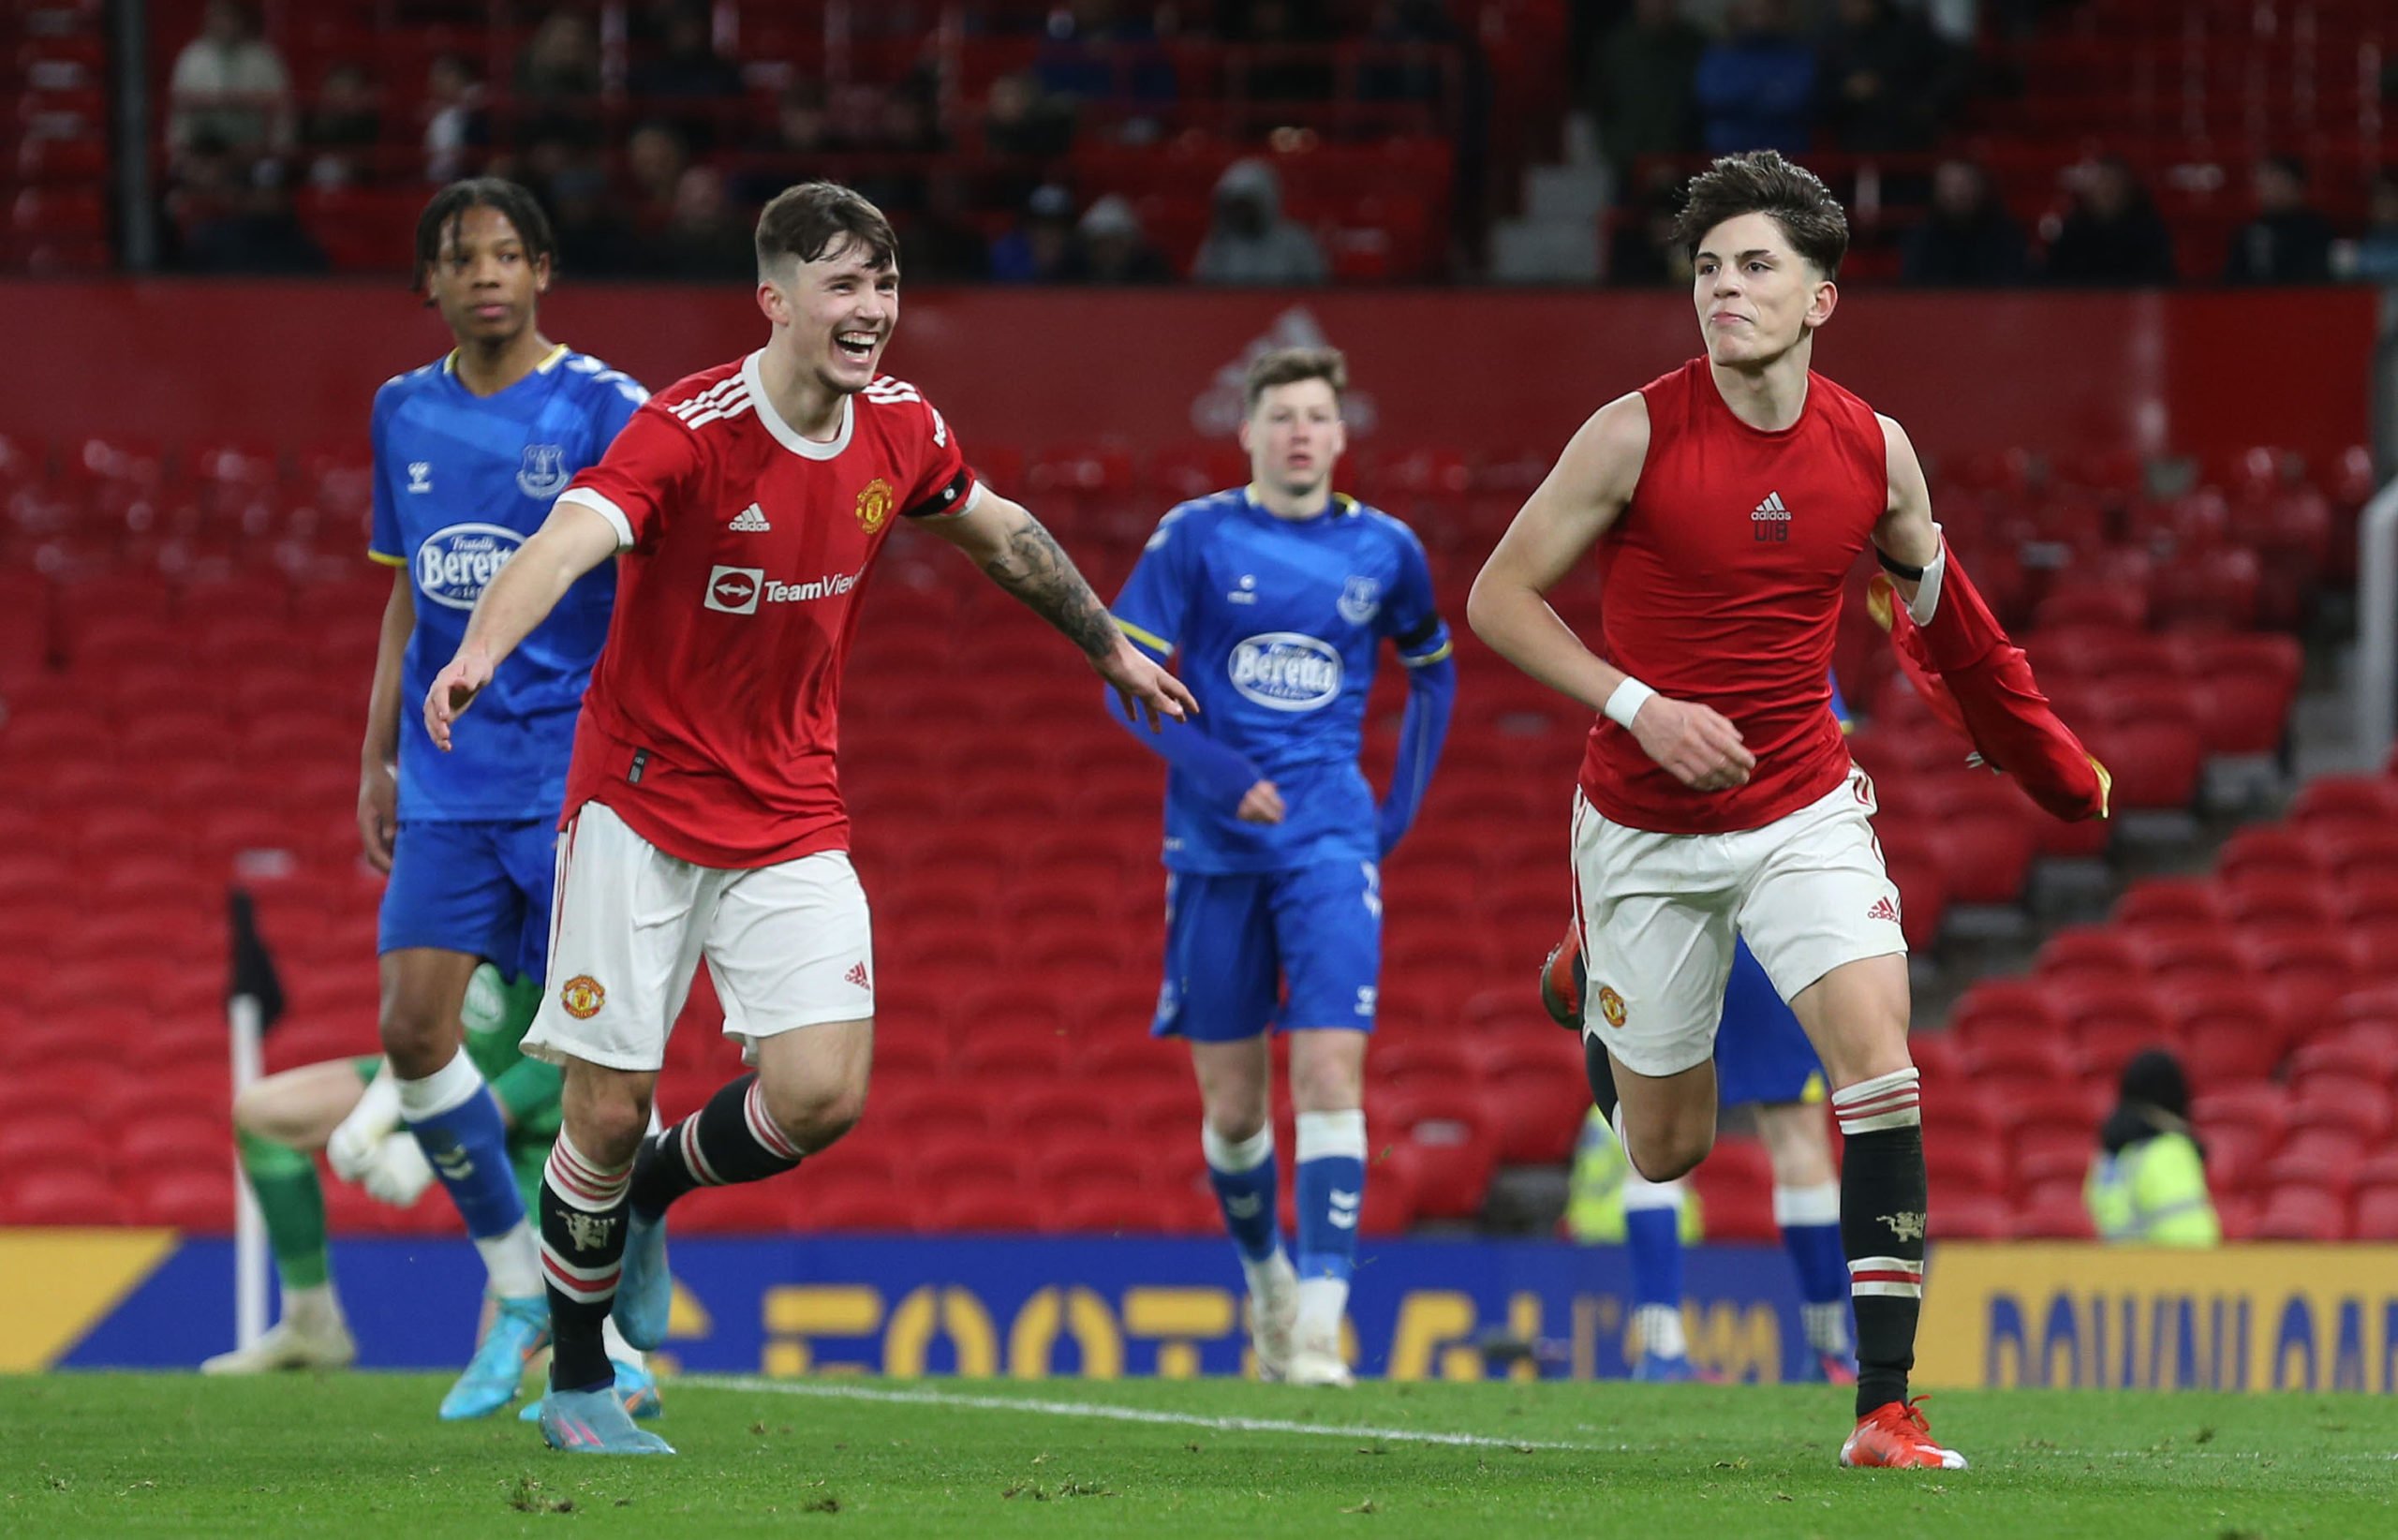 Garnacho, Mainoo and Mather praised after Manchester United FA Youth Cup win